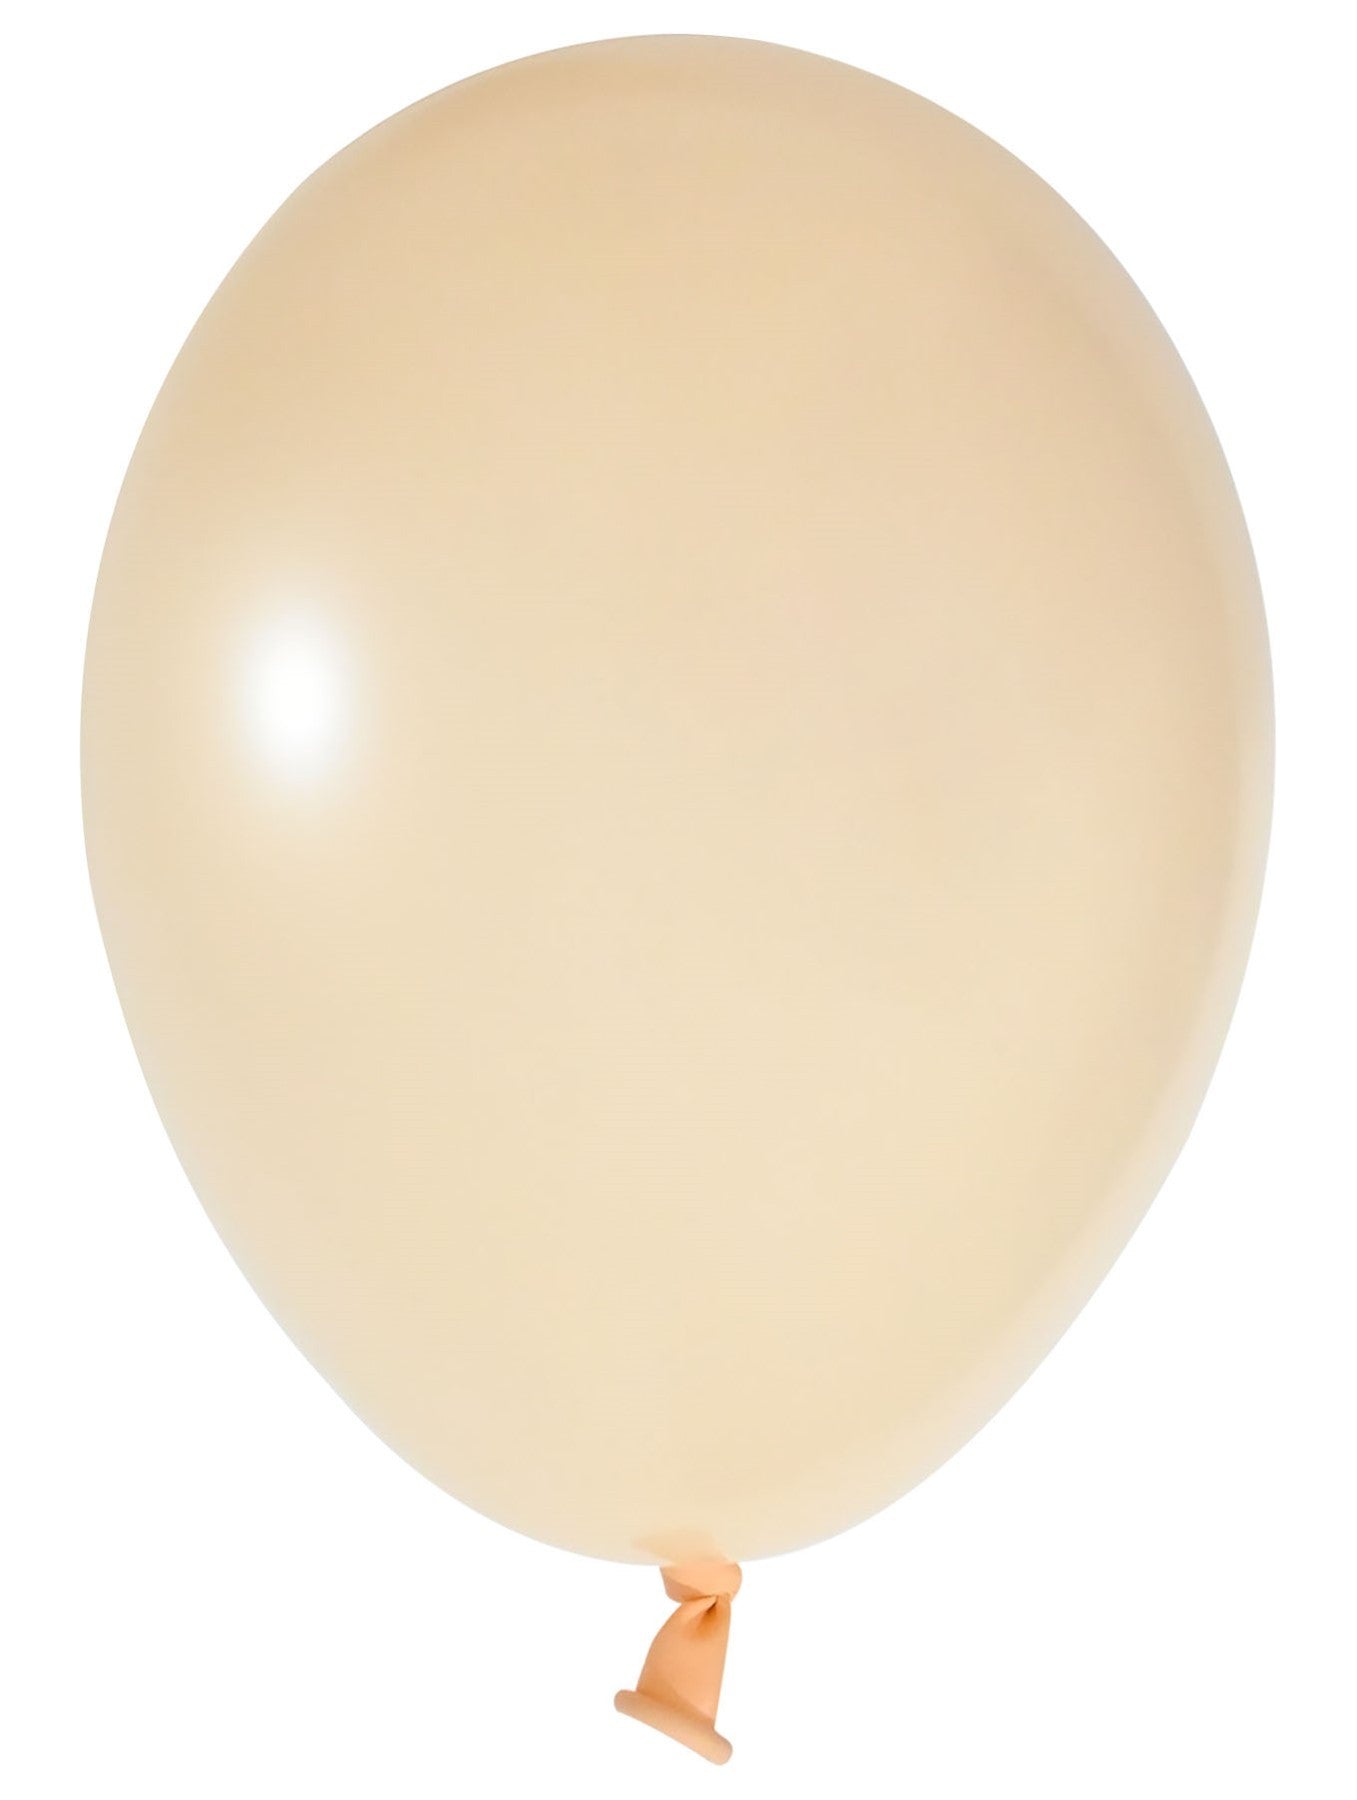 View Salmon Latex Balloon 5inch Pack of 100 information